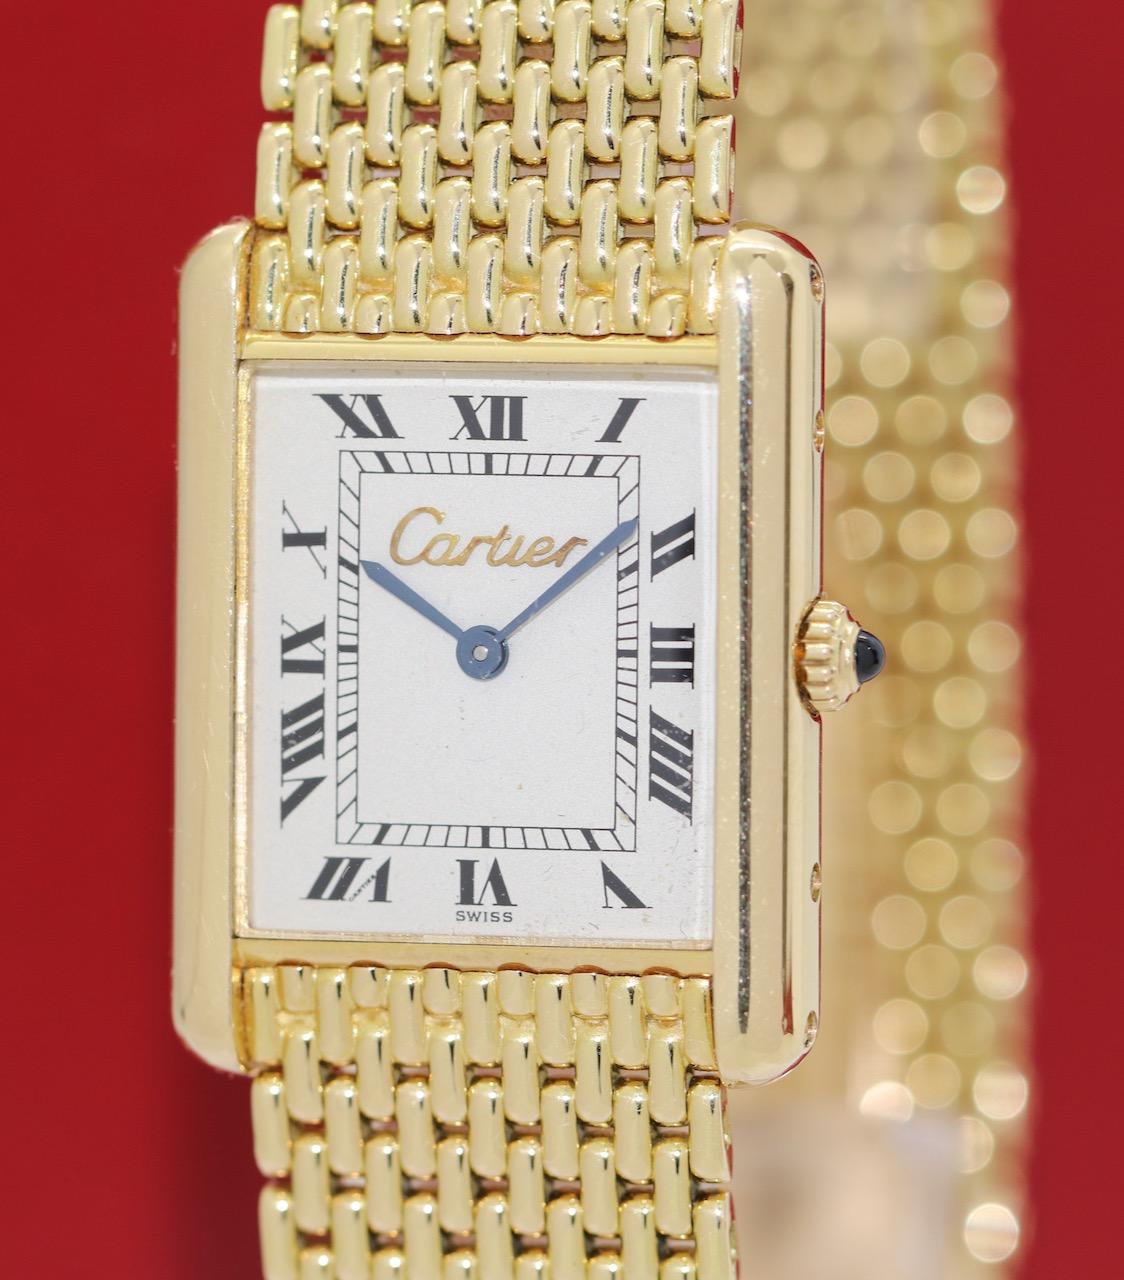 Beautiful and timeless Cartier Tank ladies' watch. Case, strap and clasp made of 18k solid gold.

Very good original condition. From first owner.
With full number of links and Original Cartier Papers.
First purchase in 1990 from Cartier Boutique,